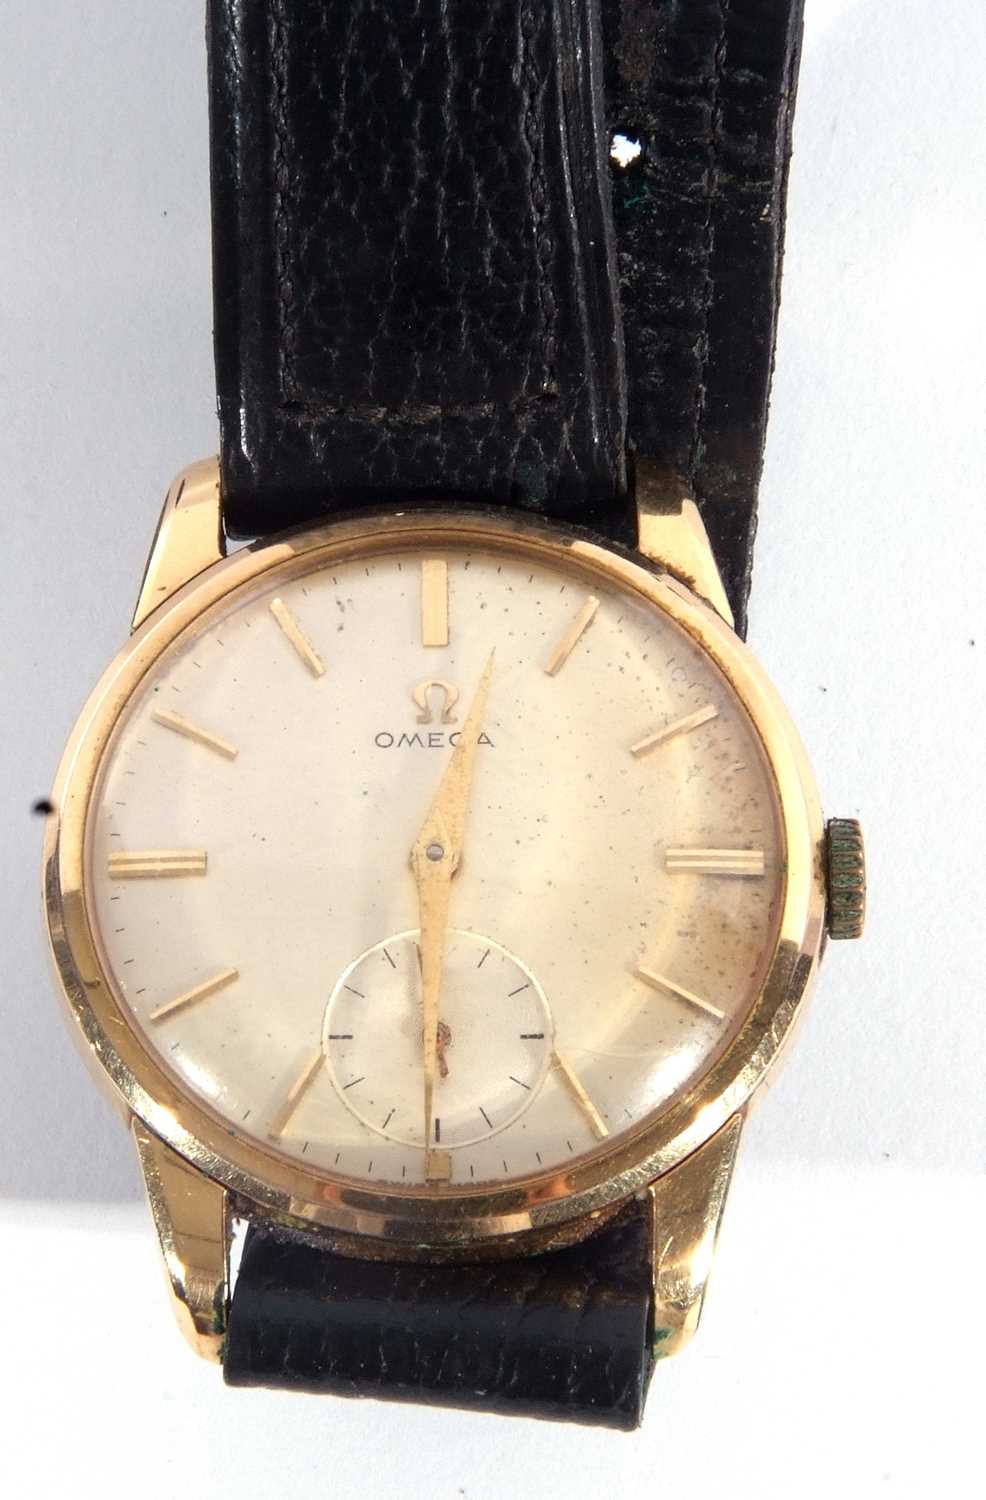 Gents Omega wristwatch with champagne dial and baton hour markers, the dial also features a sub- - Image 3 of 5